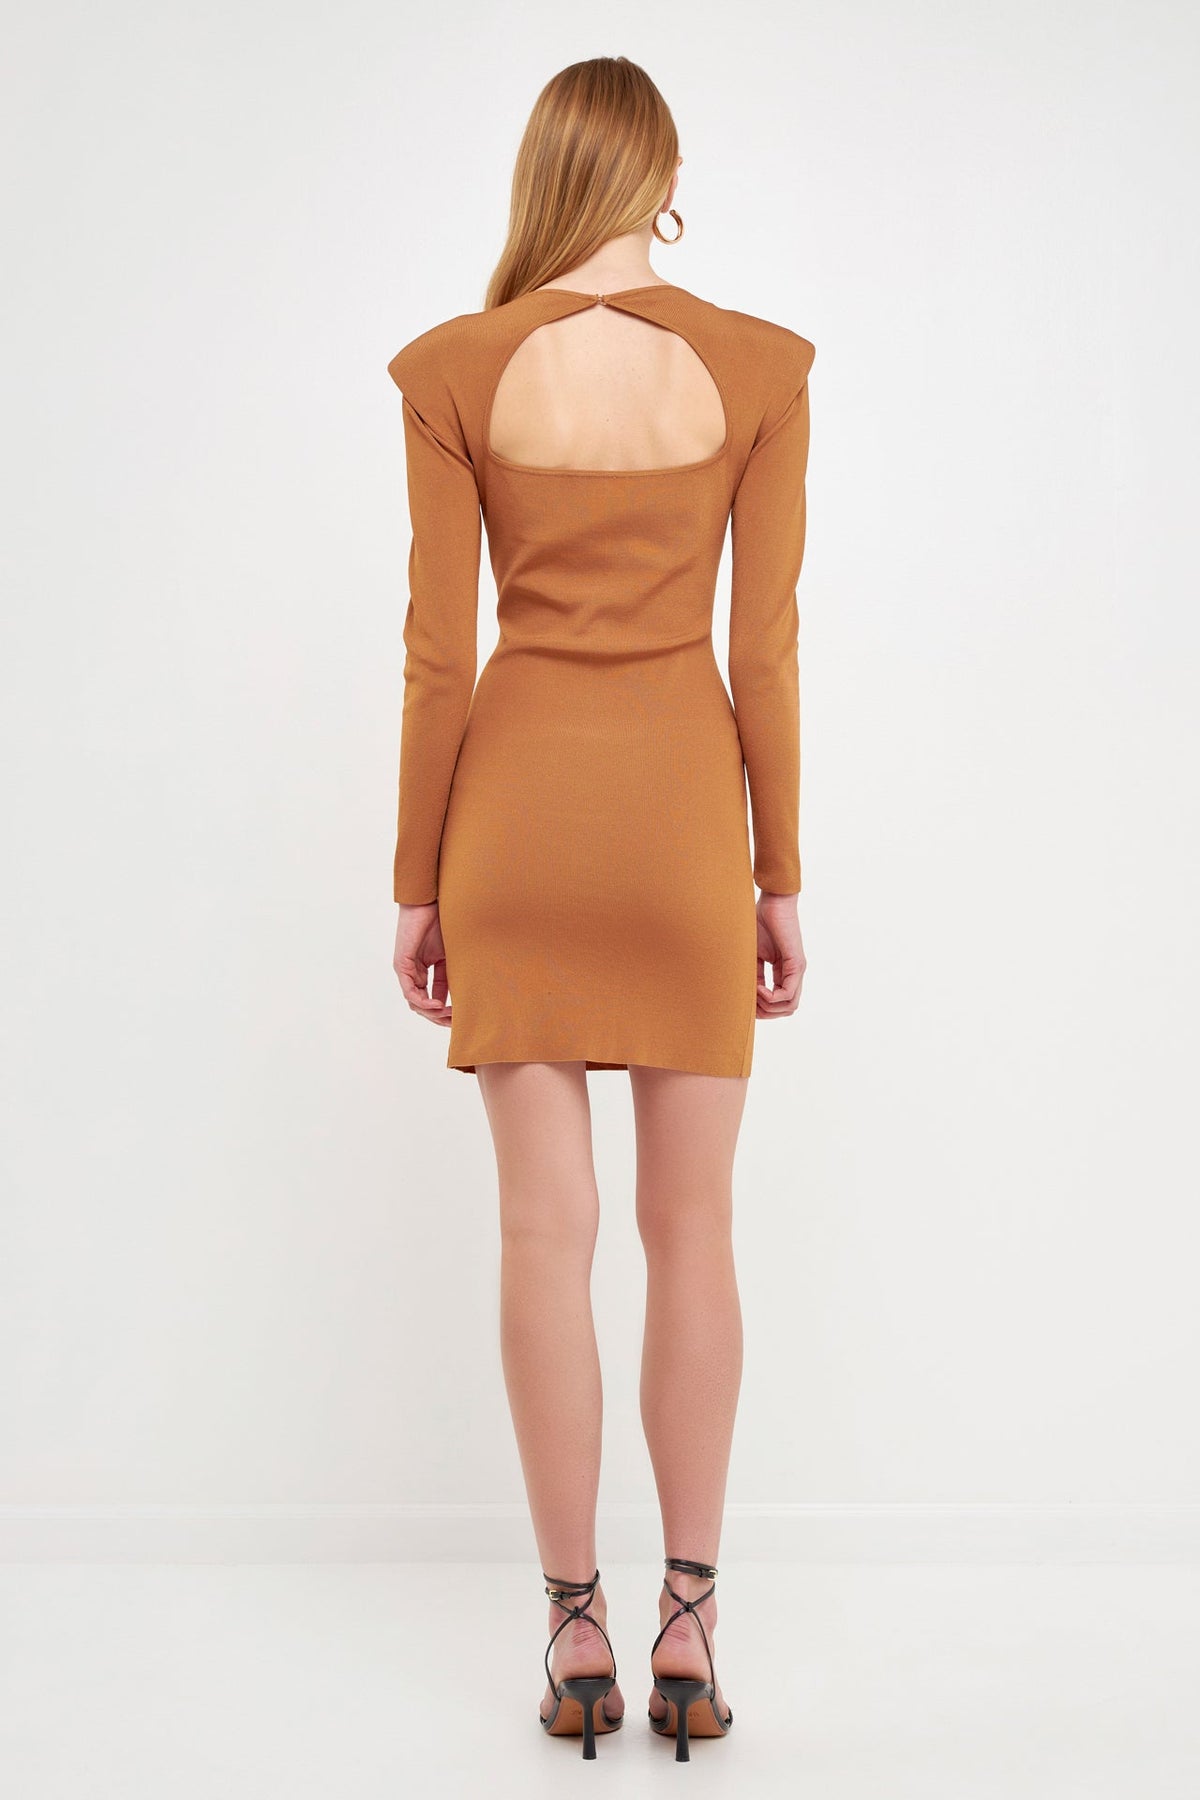 ENDLESS ROSE - Shoulder Pad Knit Dress - DRESSES available at Objectrare